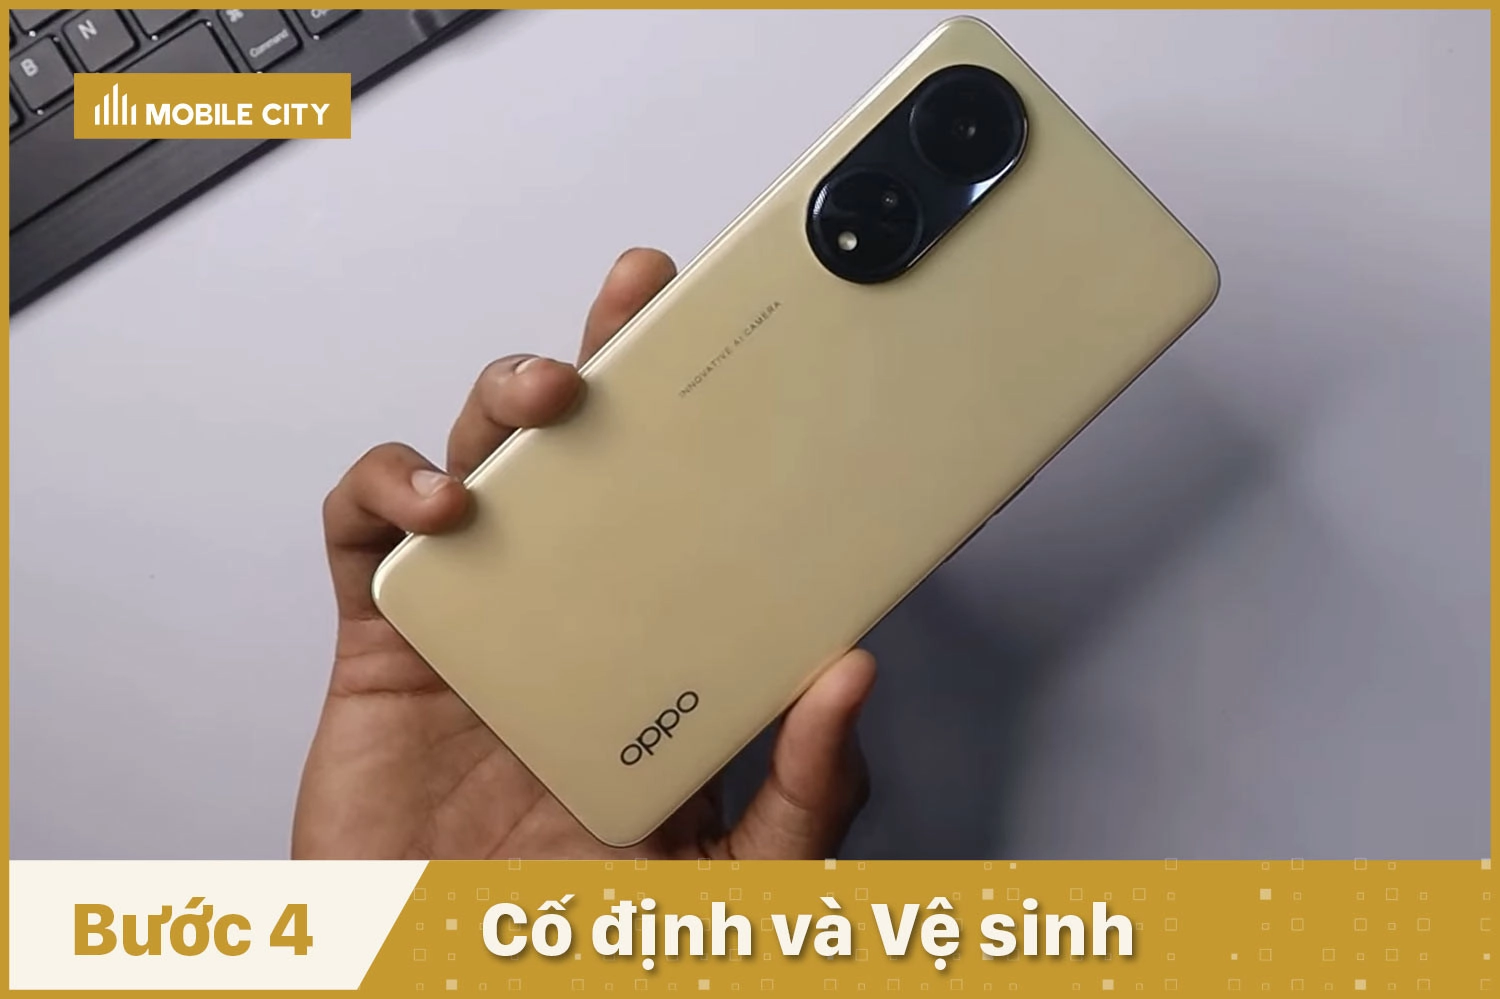 thay-kinh-lung-thay-mat-kinh-sau-oppo-f23-co-dinh-ve-sinh